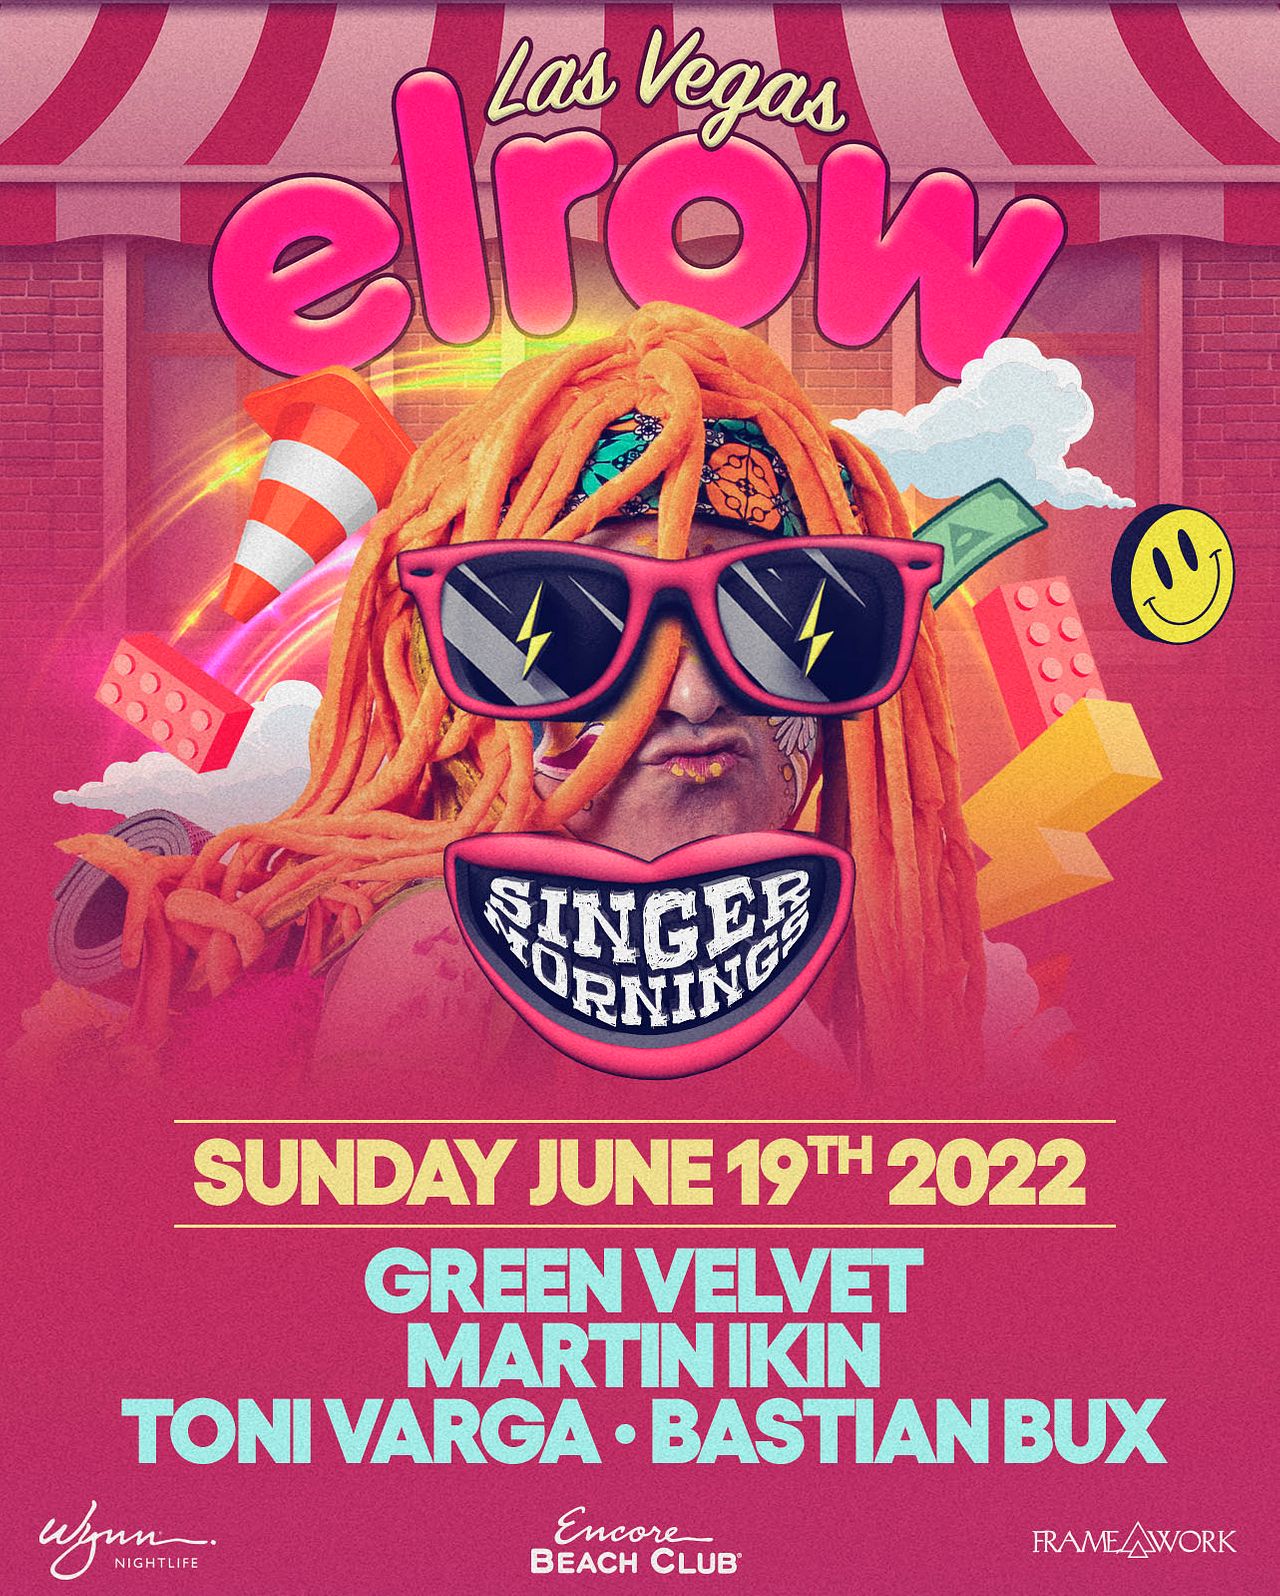 elrow with Green Velvet, Martin Ikin, Bastian Bux Tickets at Encore